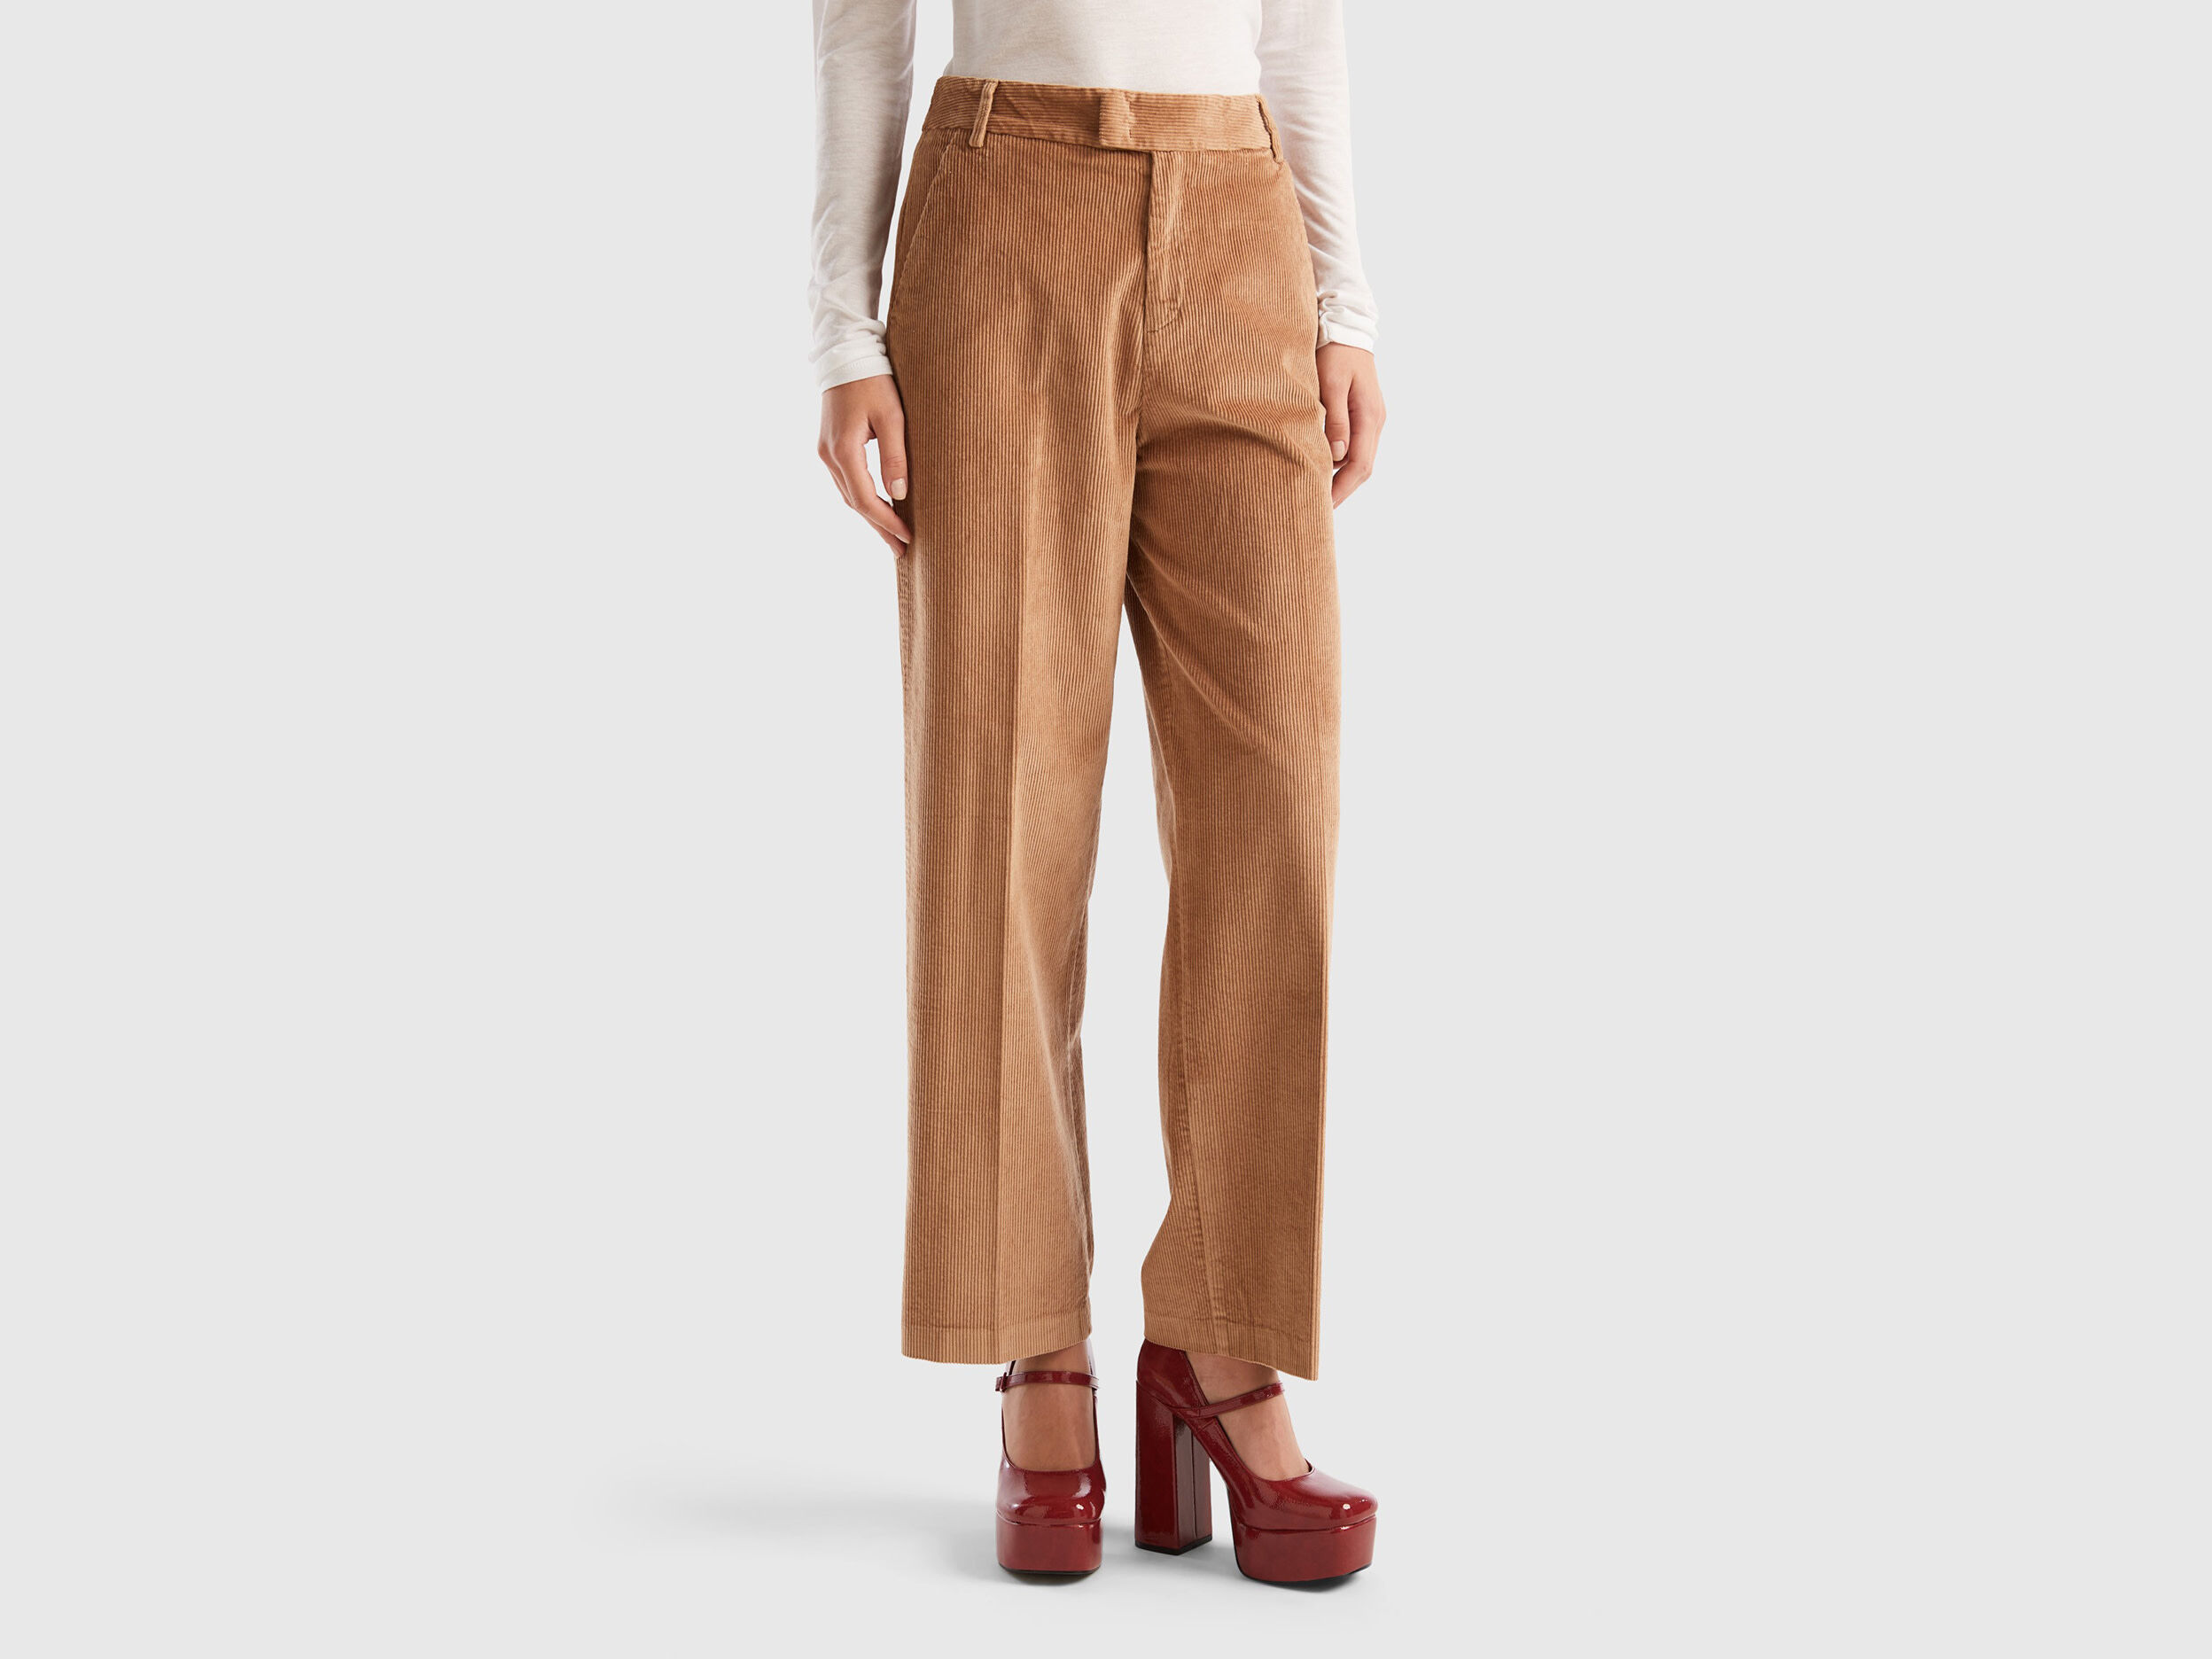 Burgundy Red Flat Front Corduroy Trousers | Peter Christian